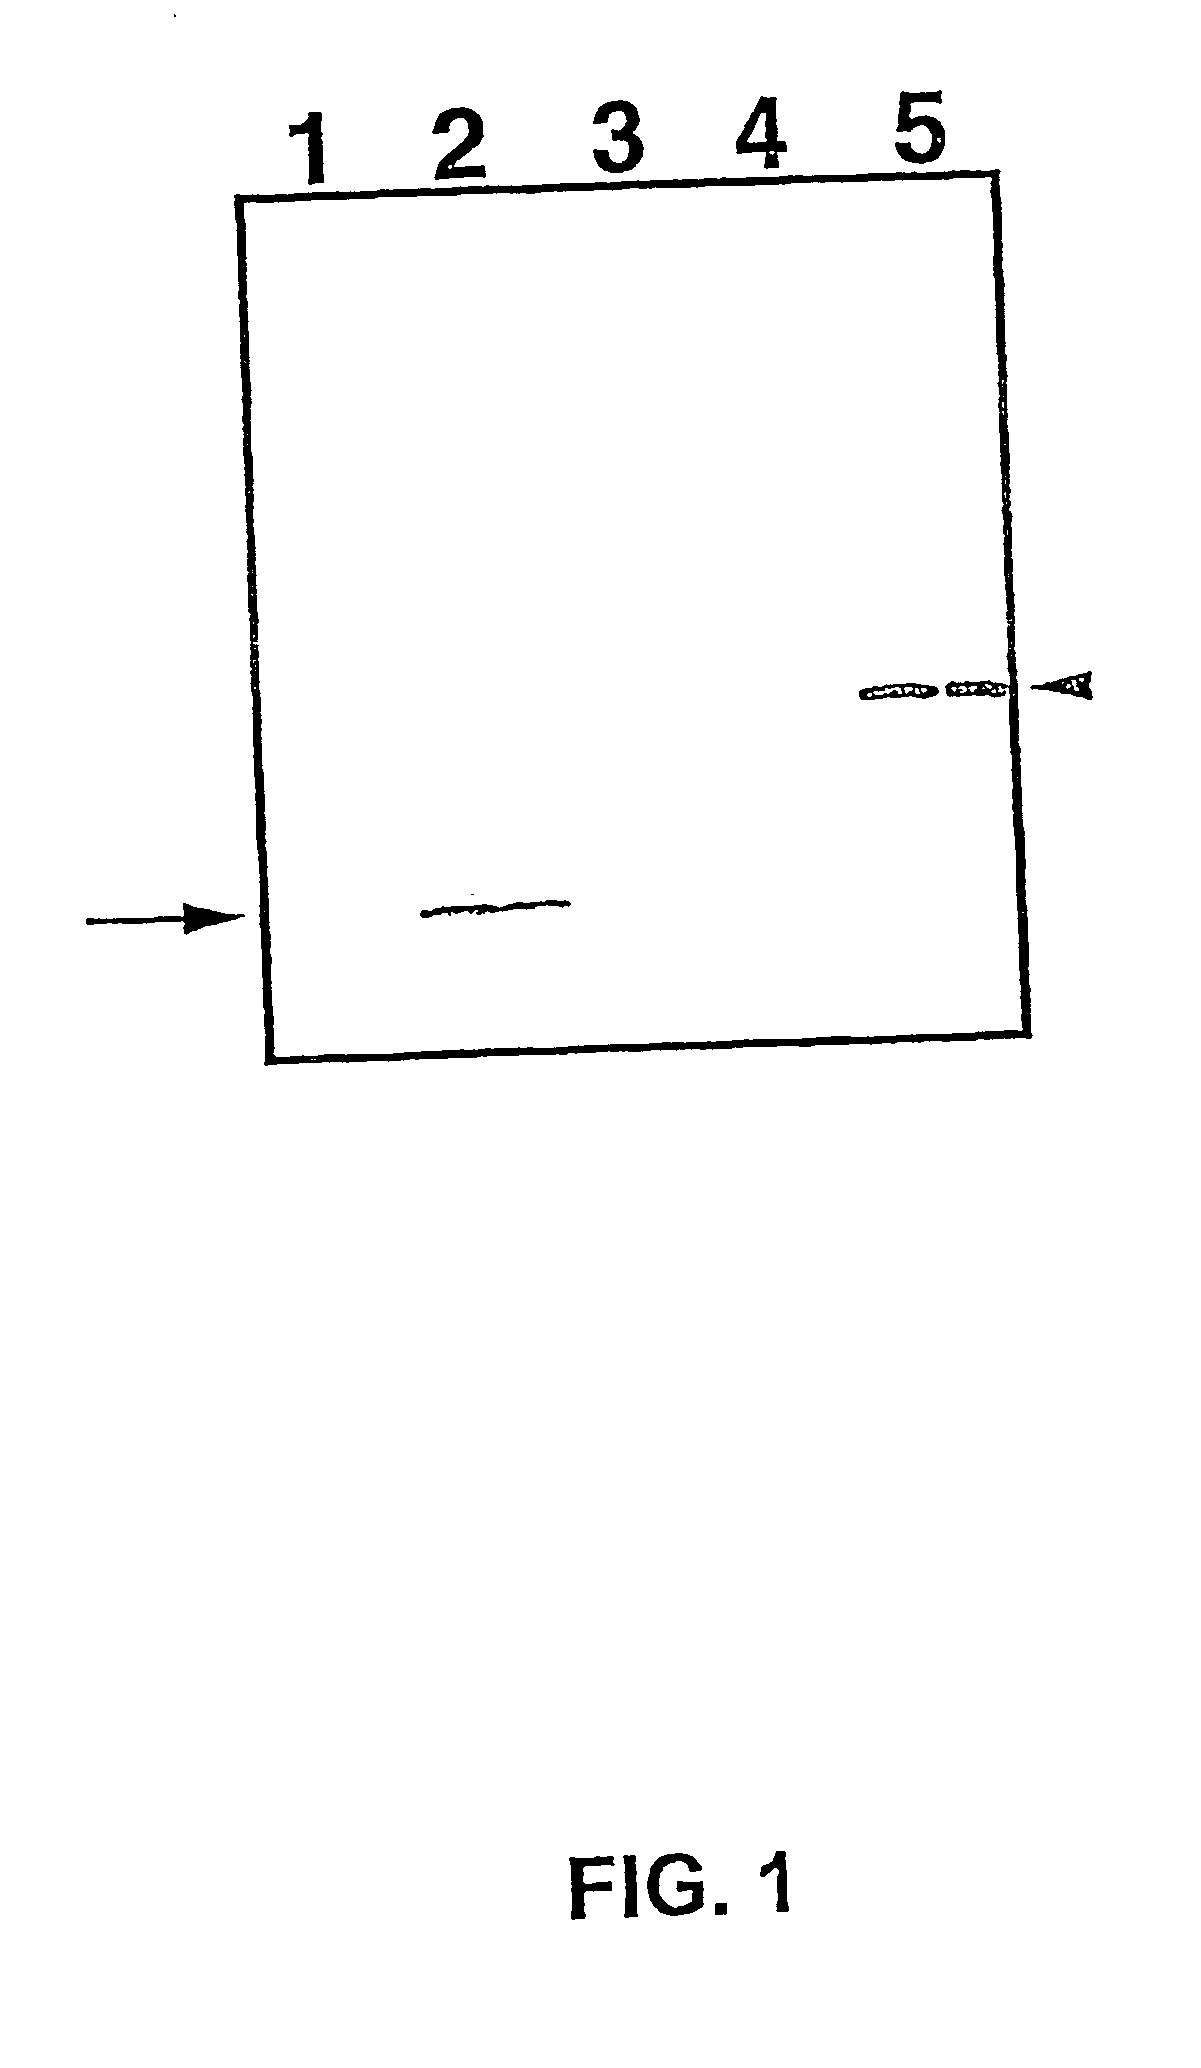 Method for isolating cell-type specific mrnas